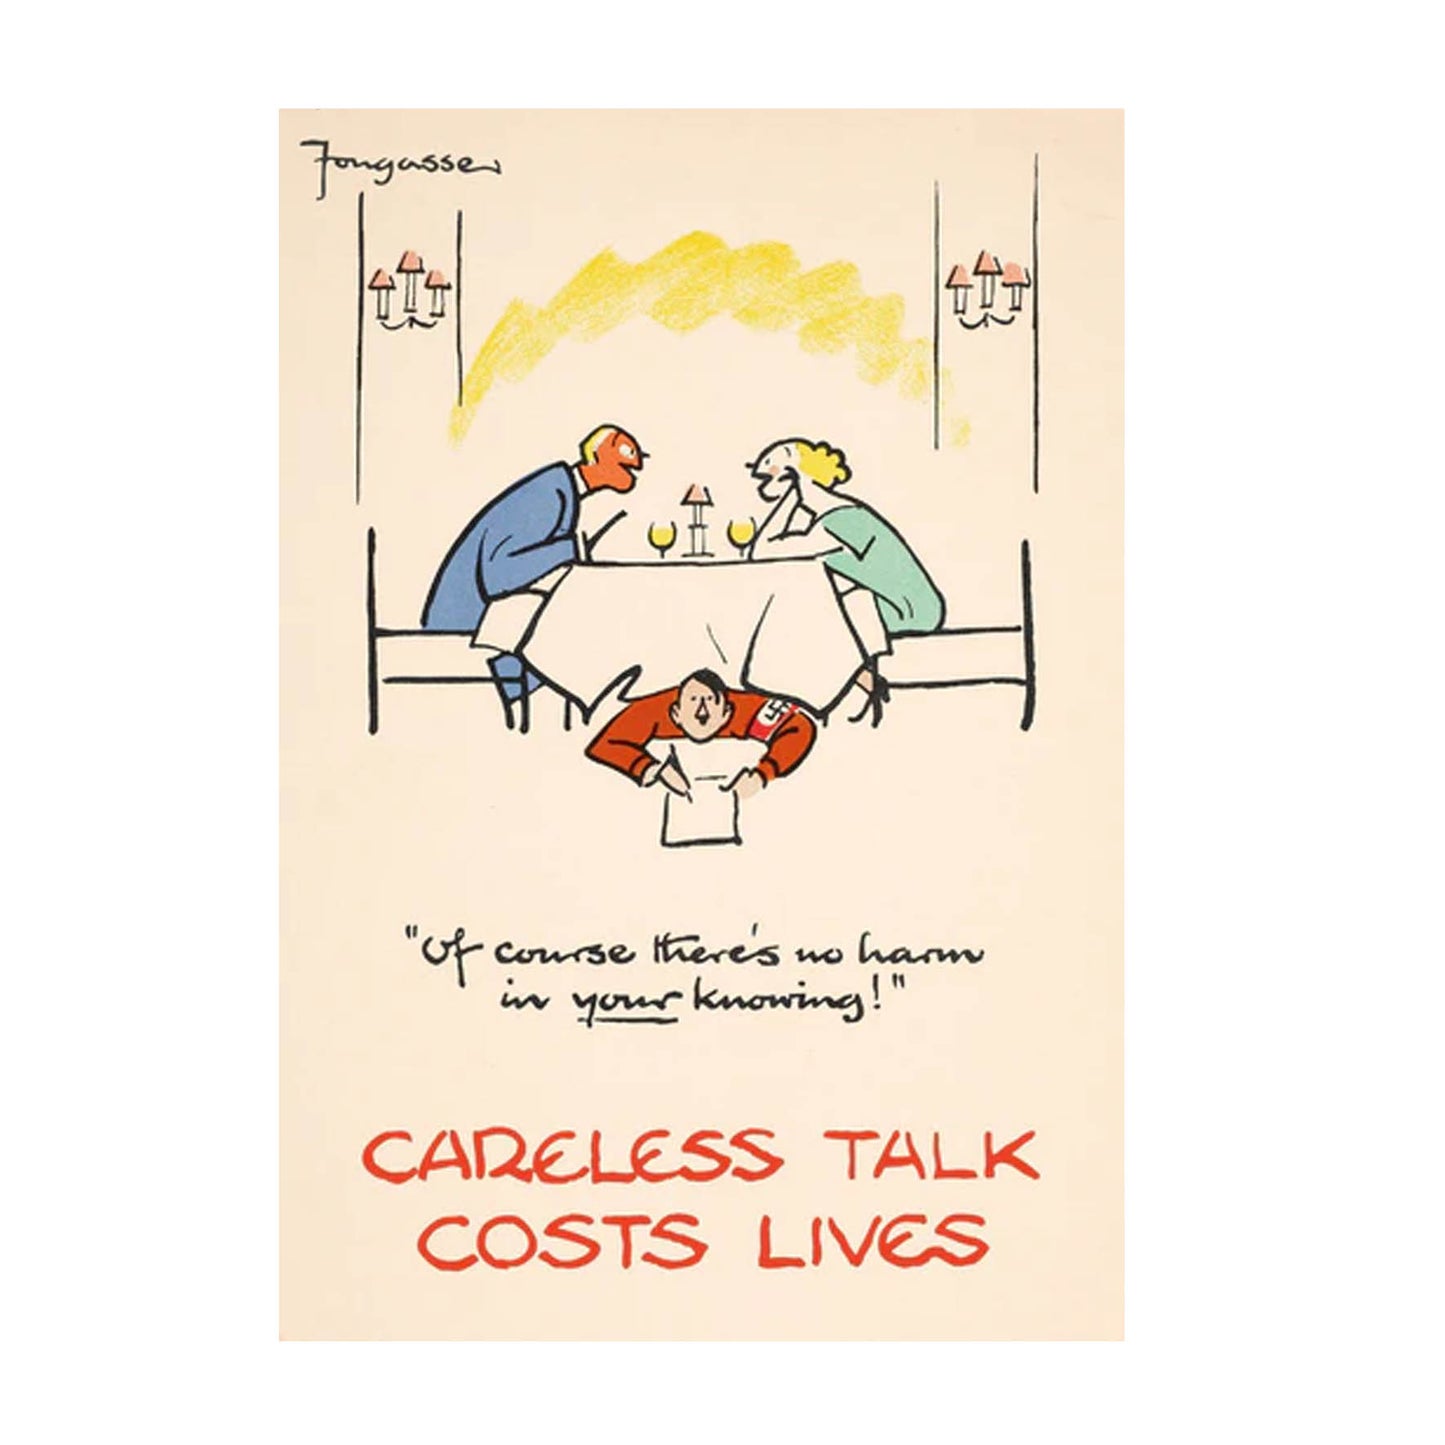 Postcard - 440513 Careless Talk Costs Lives Of course there's no harm in your knowing!